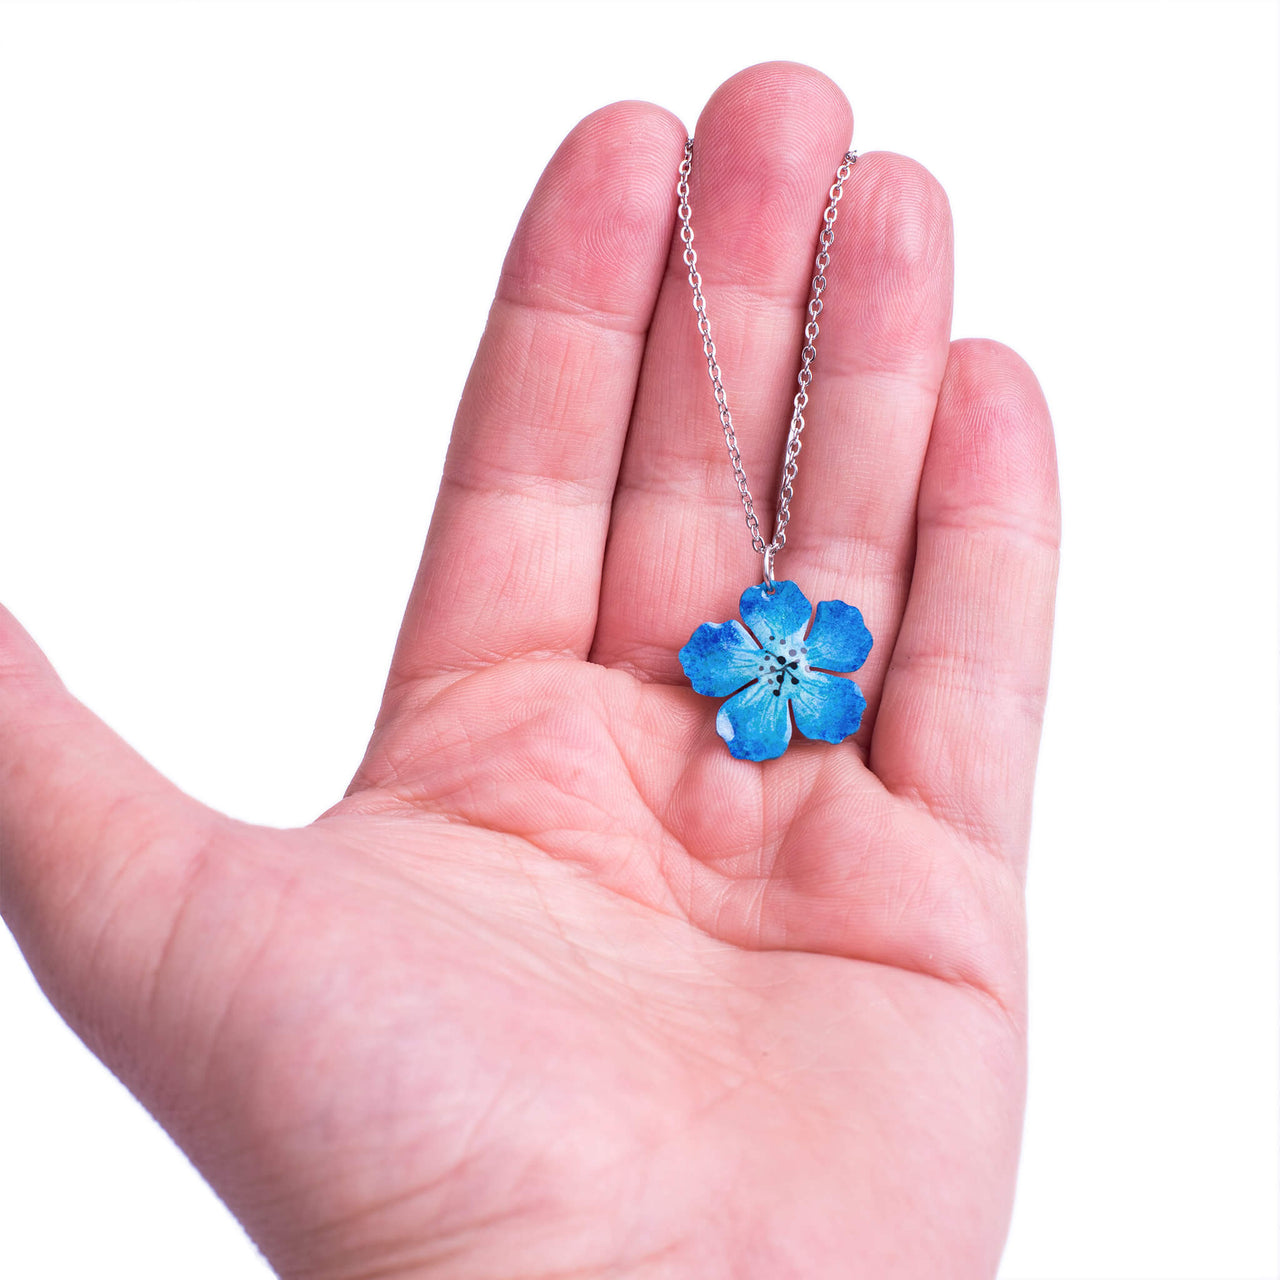 Flax bloom necklace